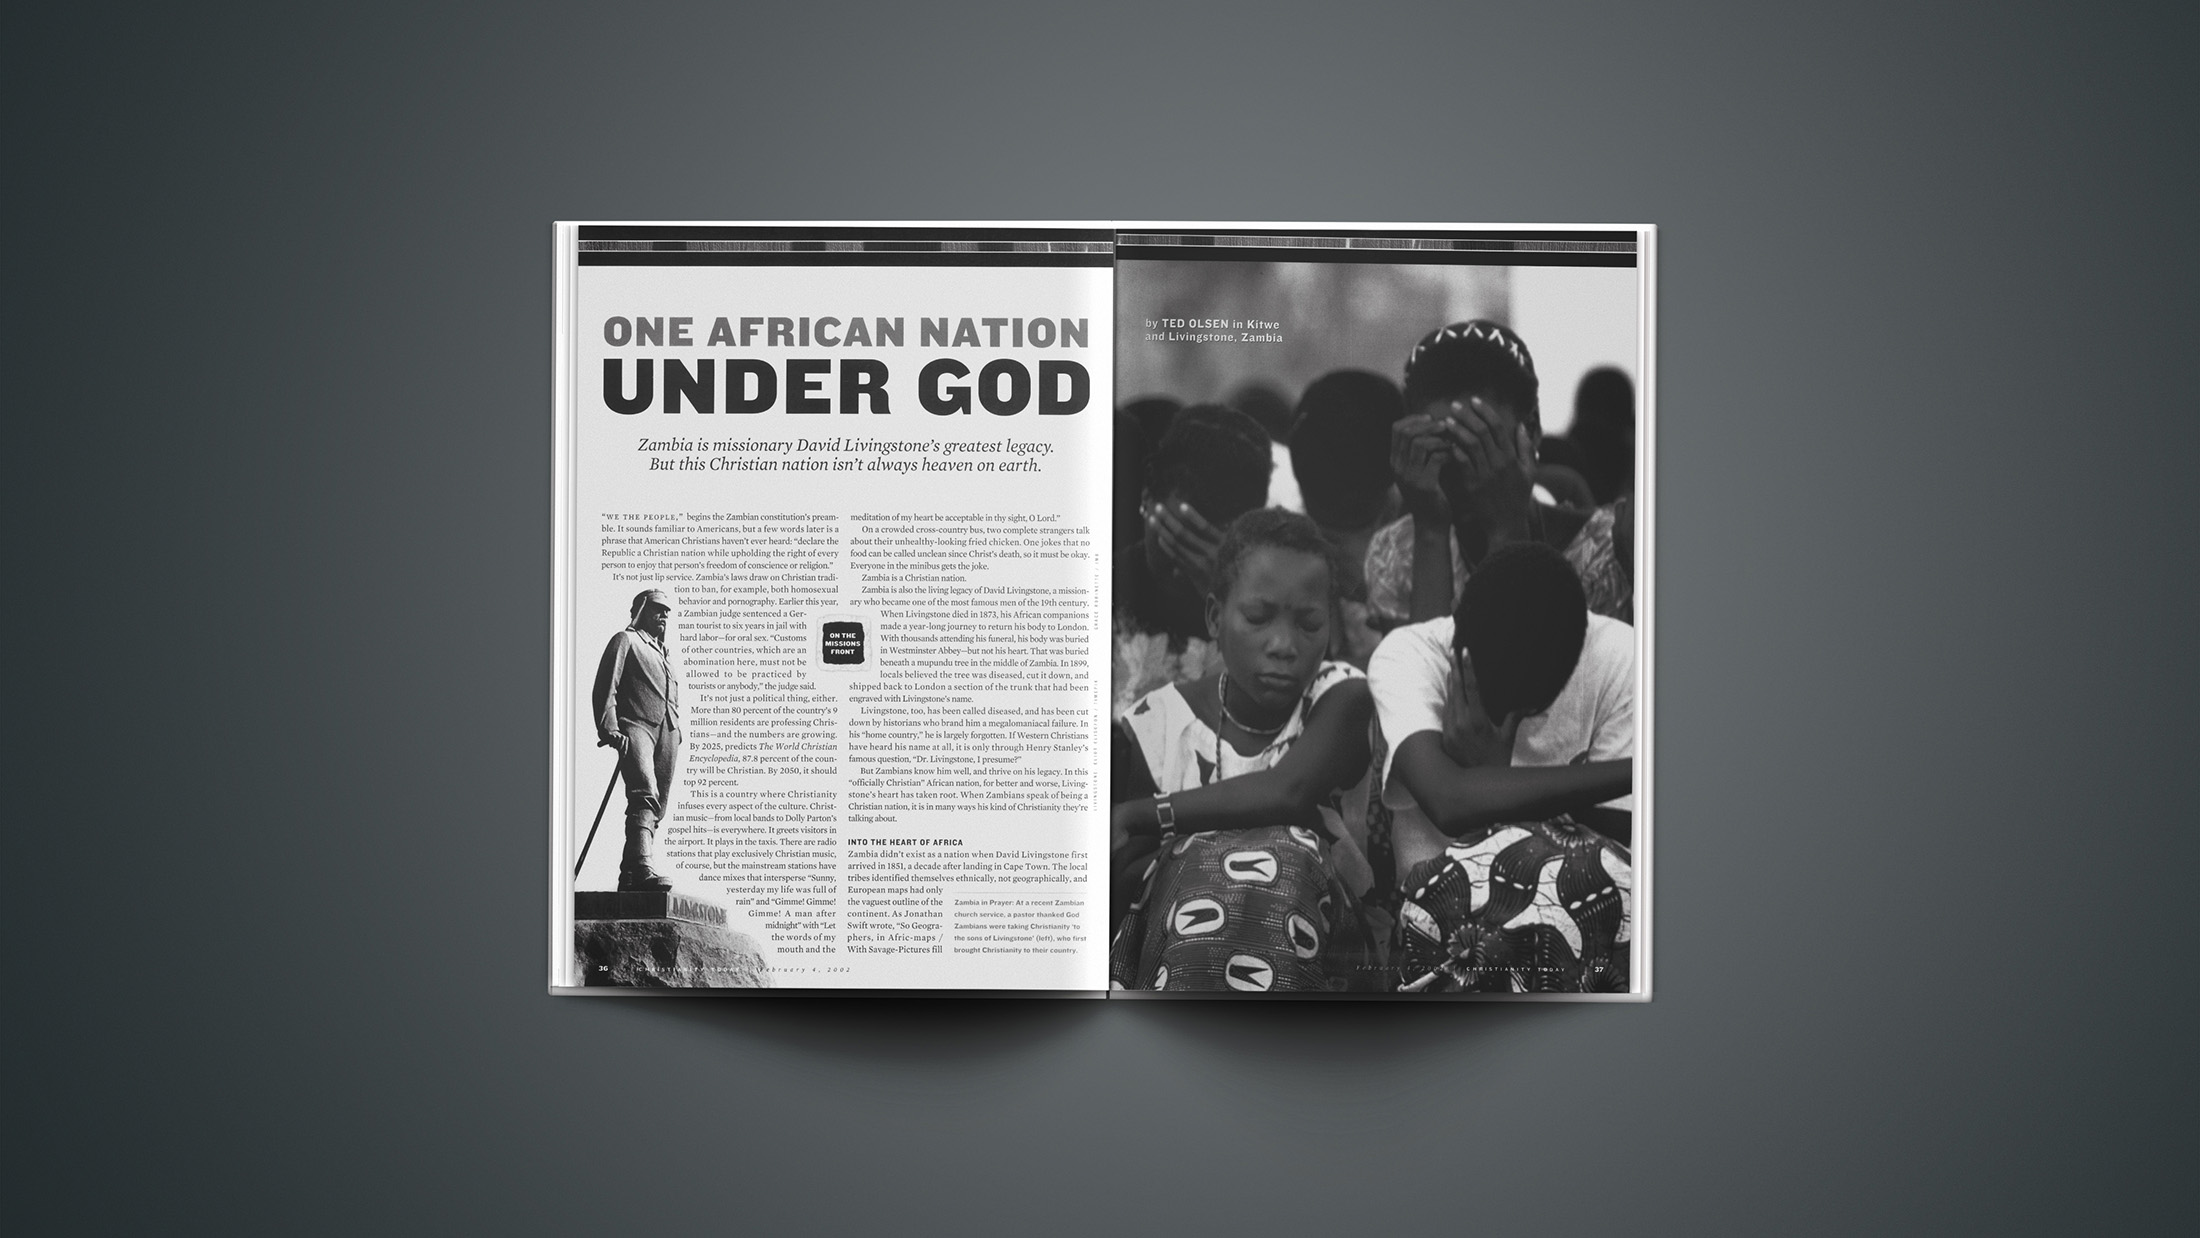 Zambia Short Ponography Videos - One African Nation Under God | Christianity Today